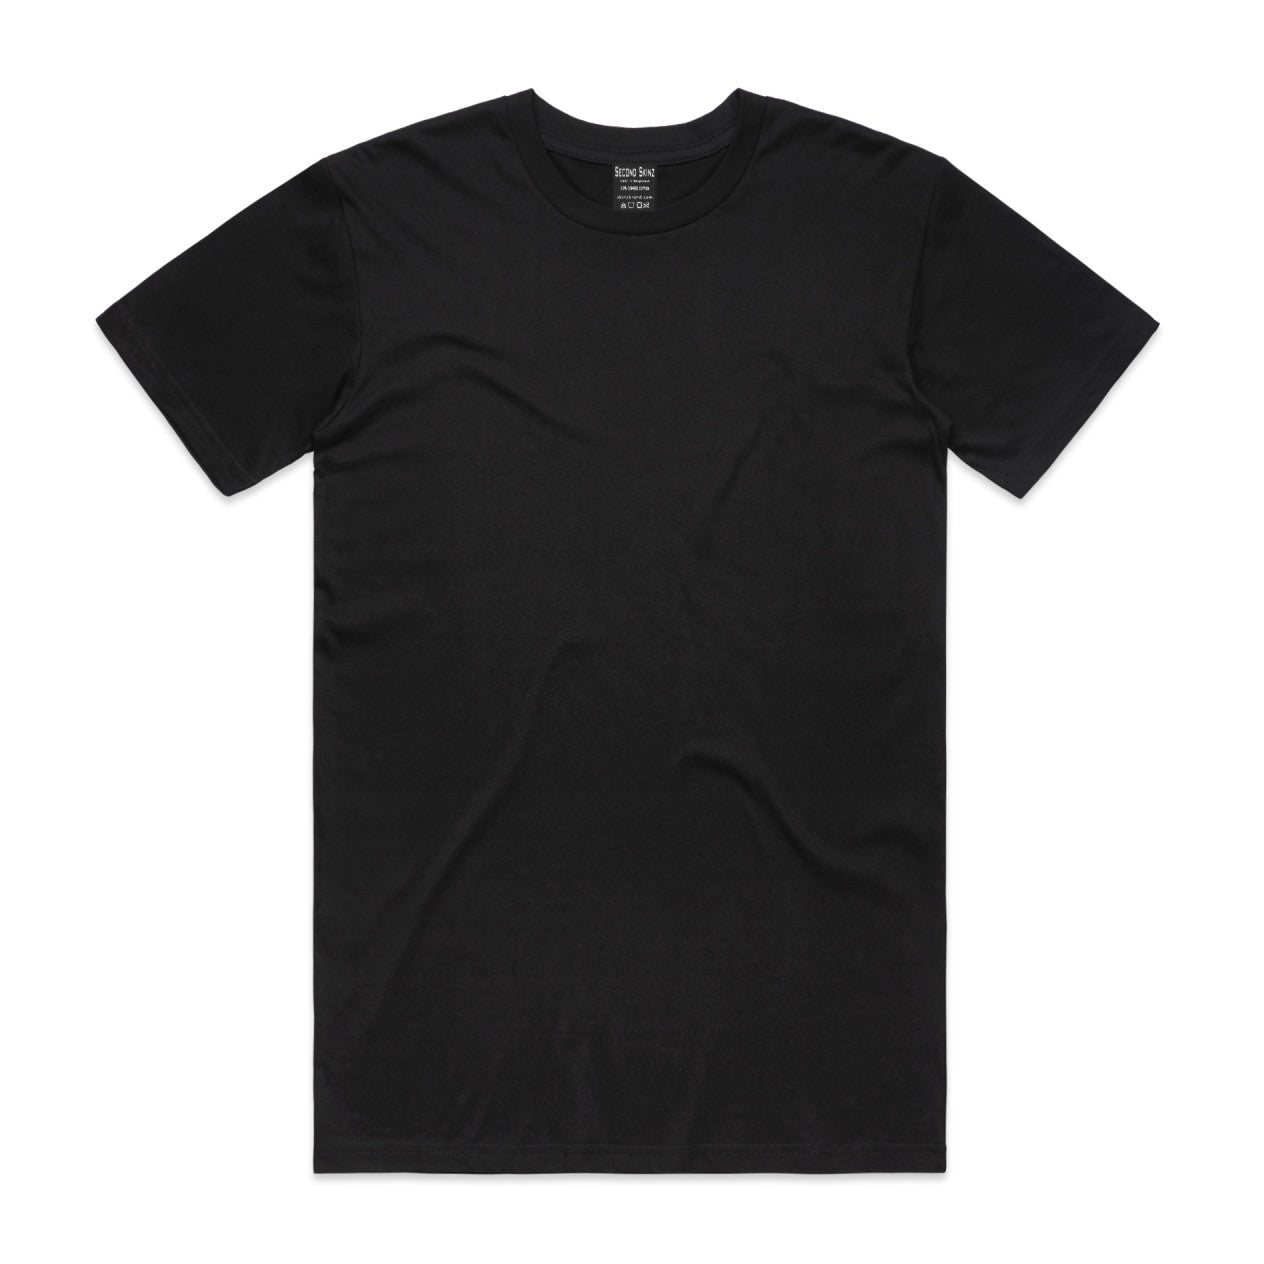 The Black Iconic Classic T-Shirt from Second Skinz